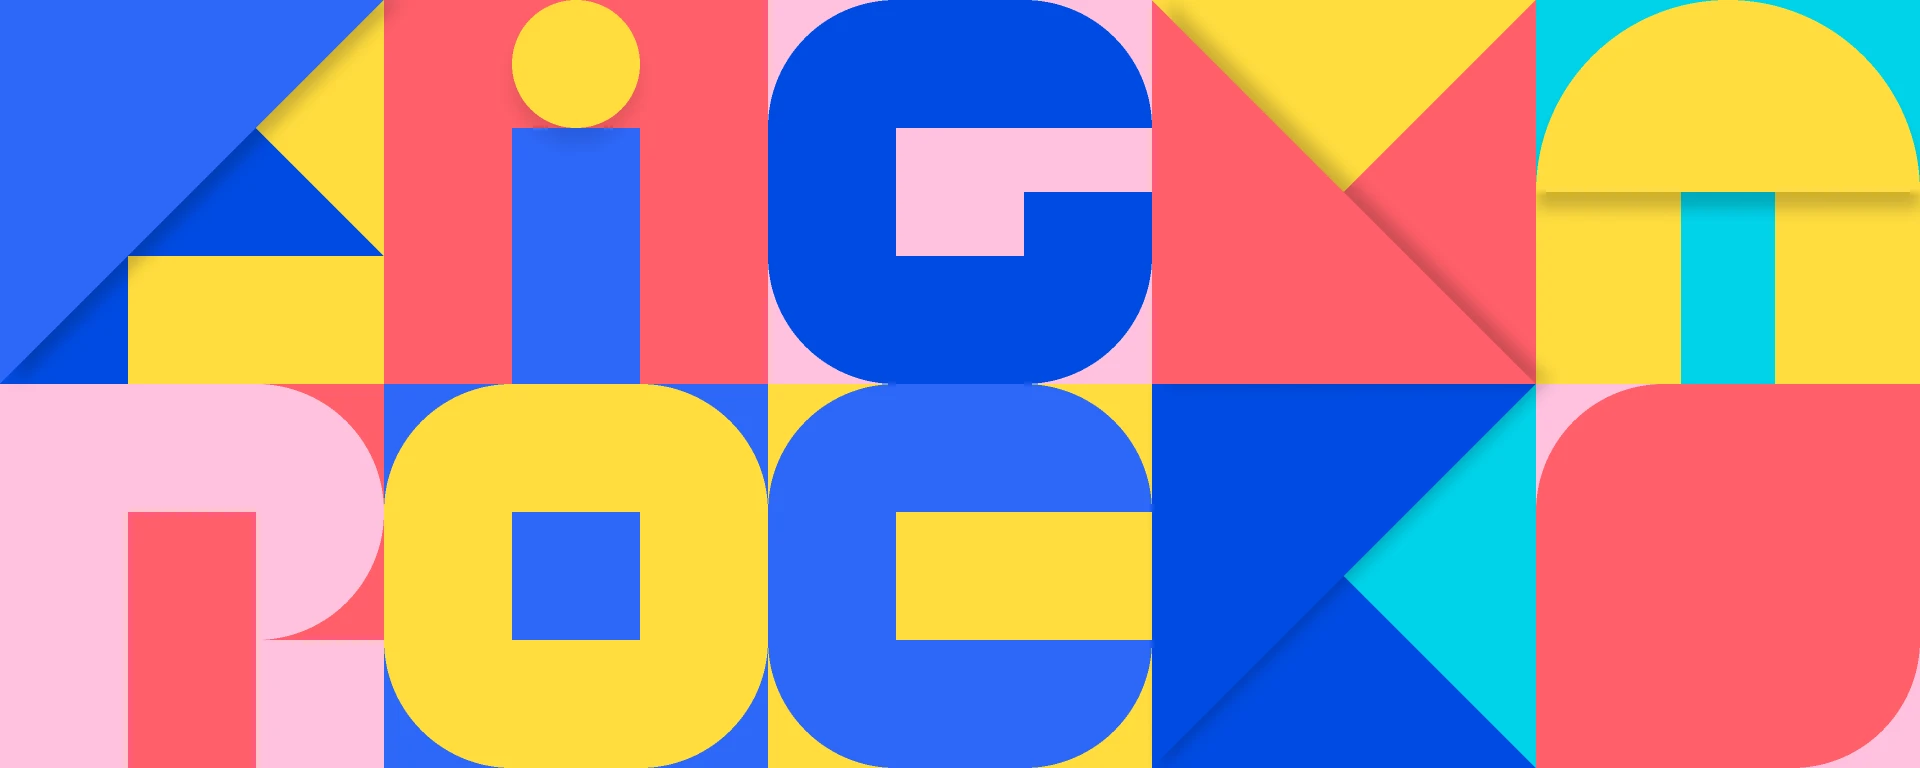 Animated Letters for Figma and Adobe XD